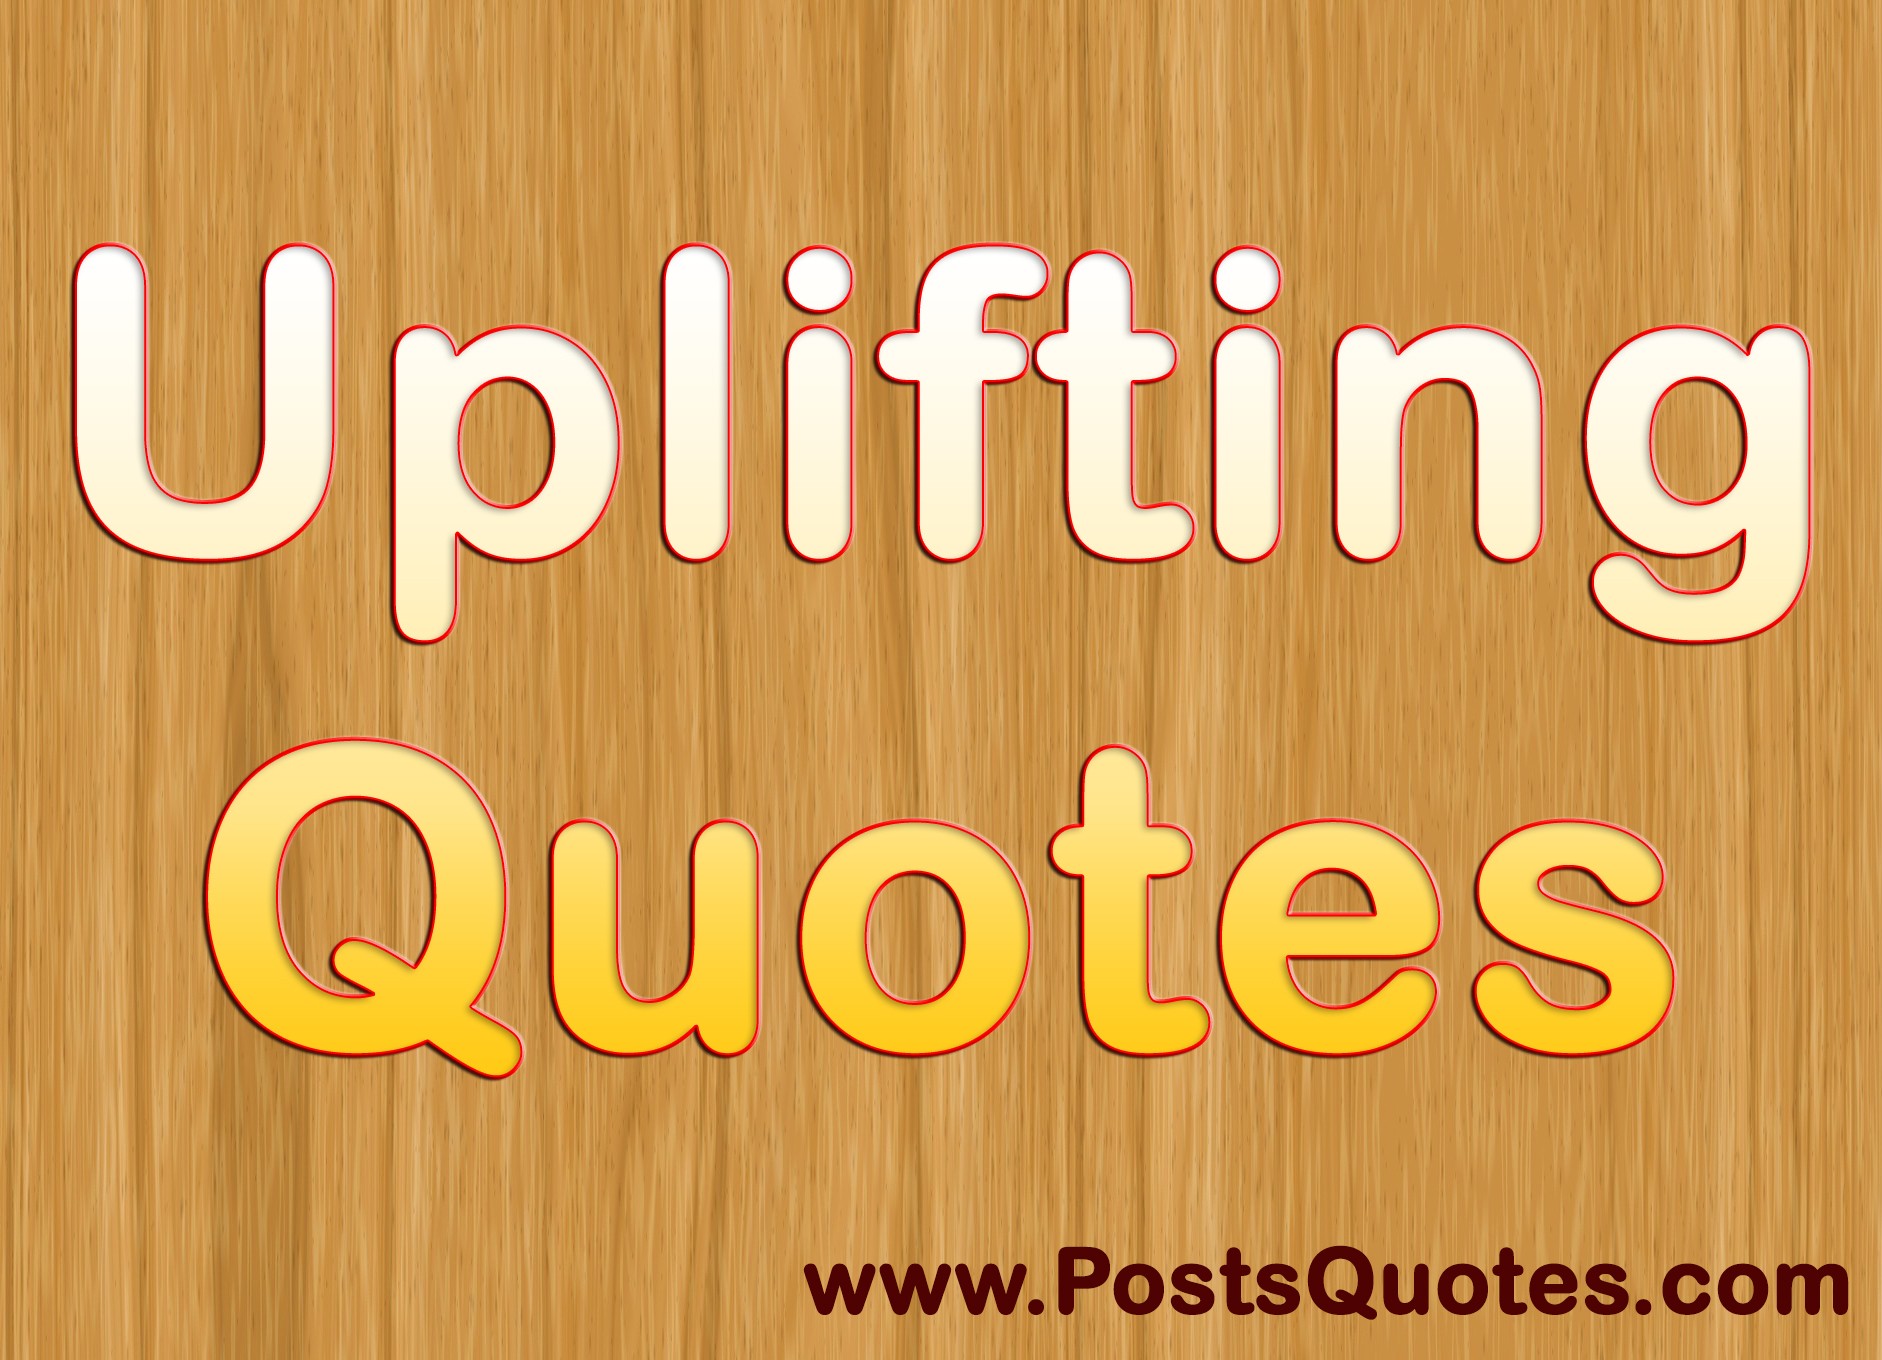 Uplifting Quotes - Posts Quotes